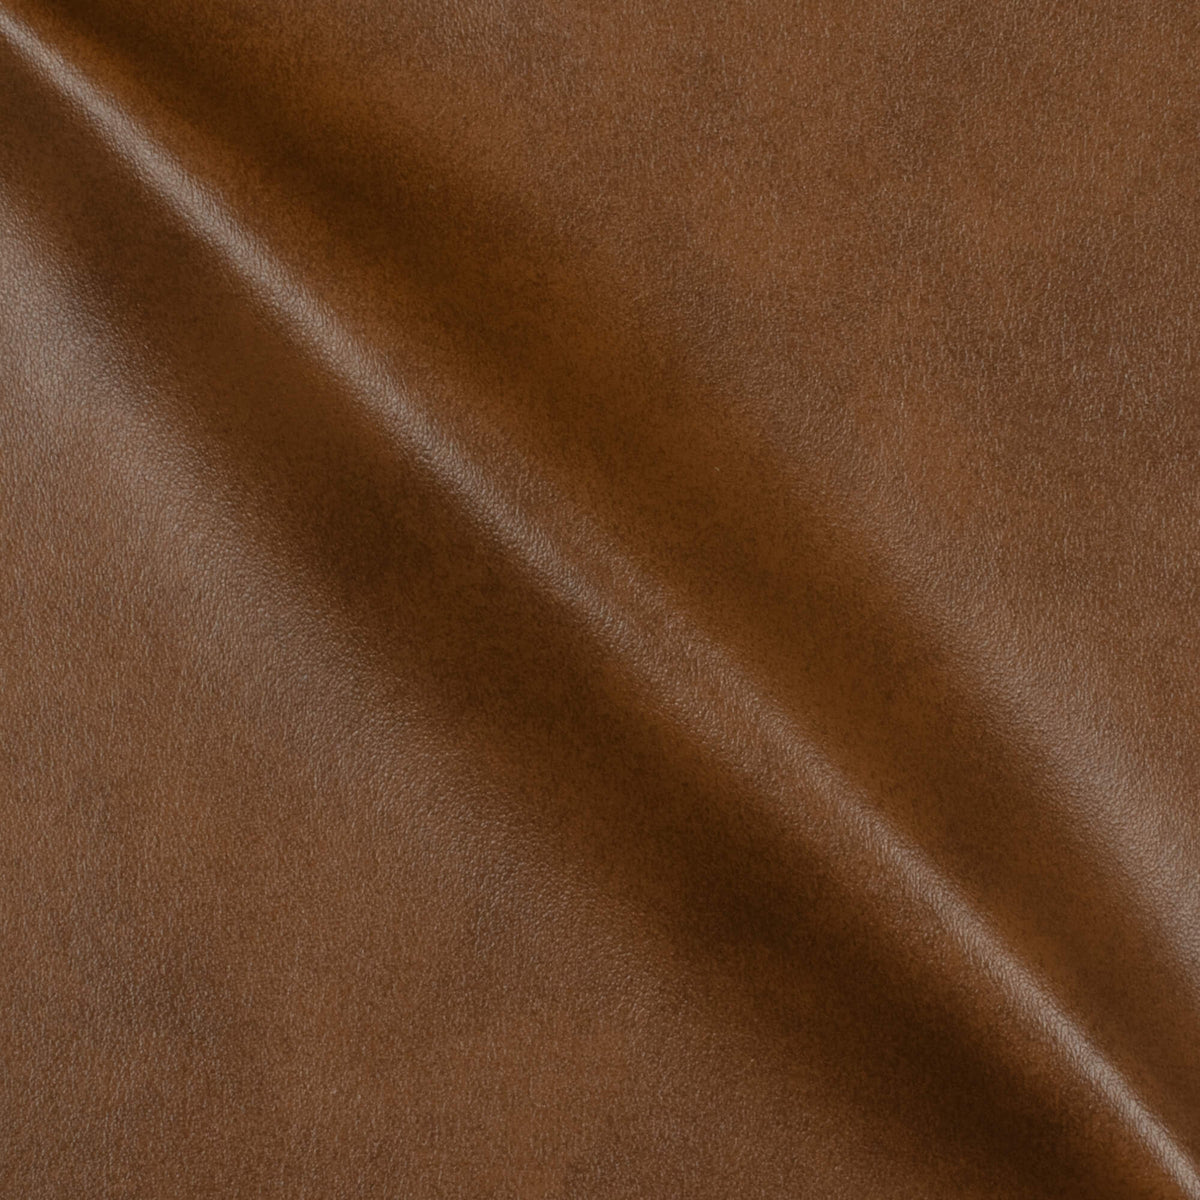 Sepia Brown Self Textured Exclusive Sofa Fabric (Width 54 Inches)